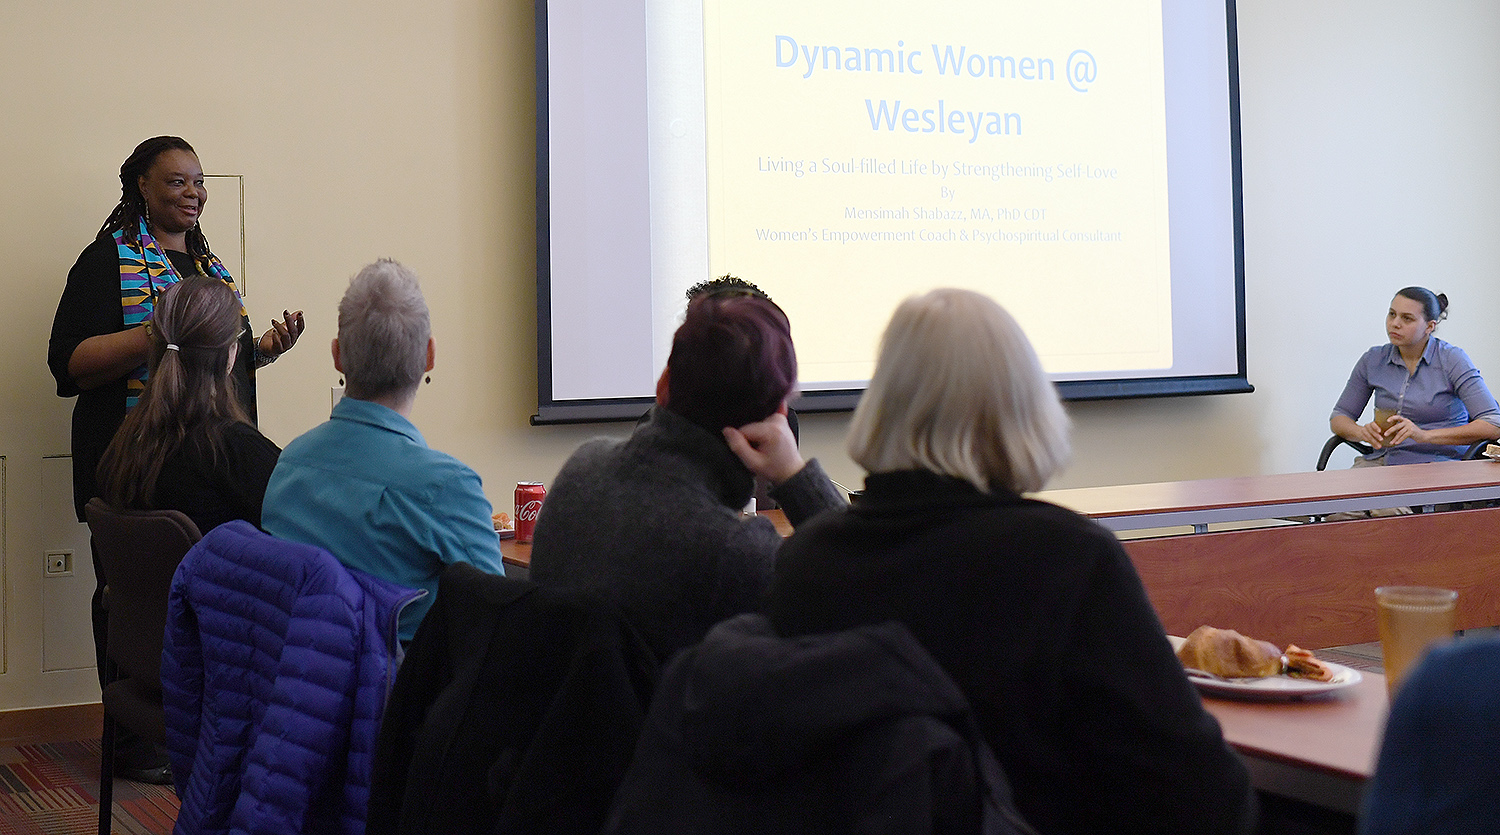 On Feb. 13, Wesleyan's Dynamic Women@Wes organization hosted a workshop on "Living a Soul-filled Life by Strengthening Self-Love." Inspirational speaker Mensimah Shabazz led a meditation and discussed that focused on creative ways of generating self-confidence, fearlessness and inner wisdom. Shabazz is the president of AGAPE Consulting, which focuses on energy healing and psychospirituality.